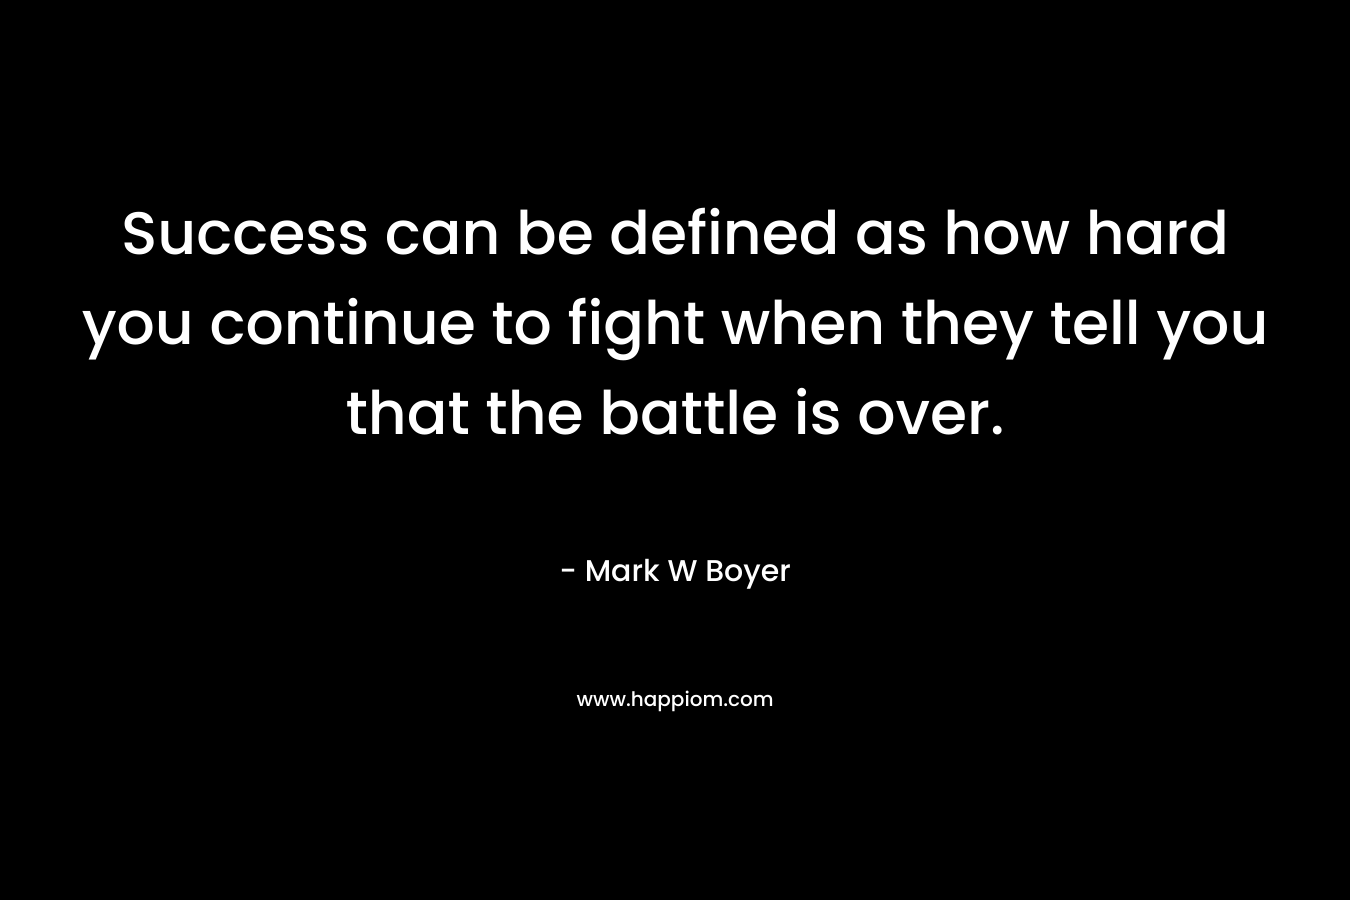 Success can be defined as how hard you continue to fight when they tell you that the battle is over.